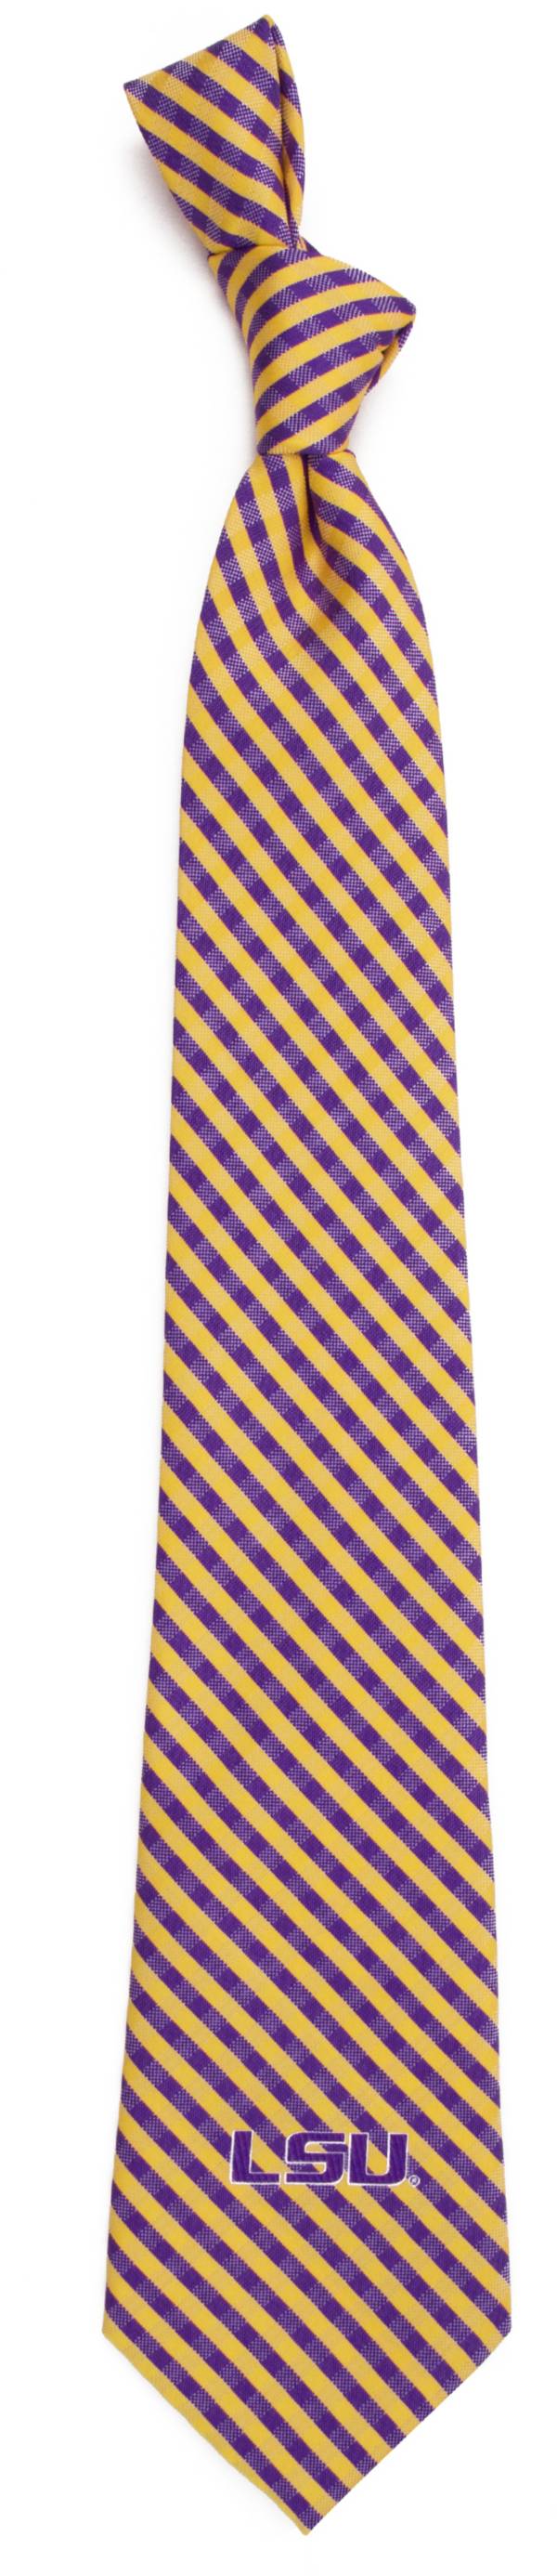 Eagles Wings LSU Tigers Gingham Necktie product image